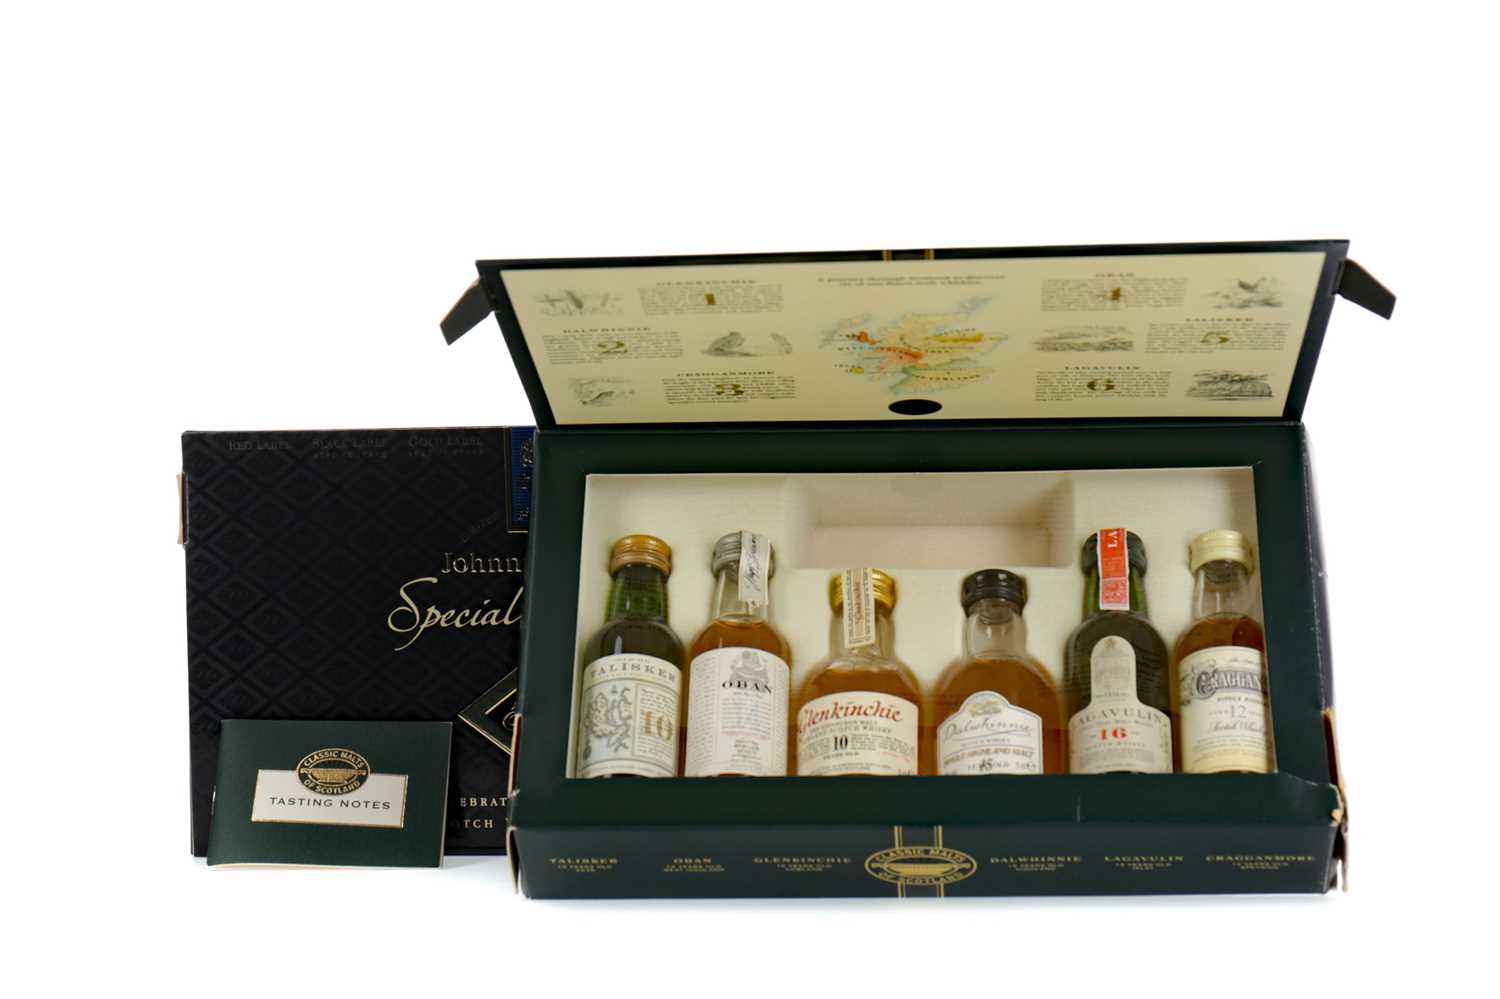 Lot 80 - JOHNNIE WALKER SPECIAL COLLECTION AND CLASSIC MALTS MINIATURE PACKS